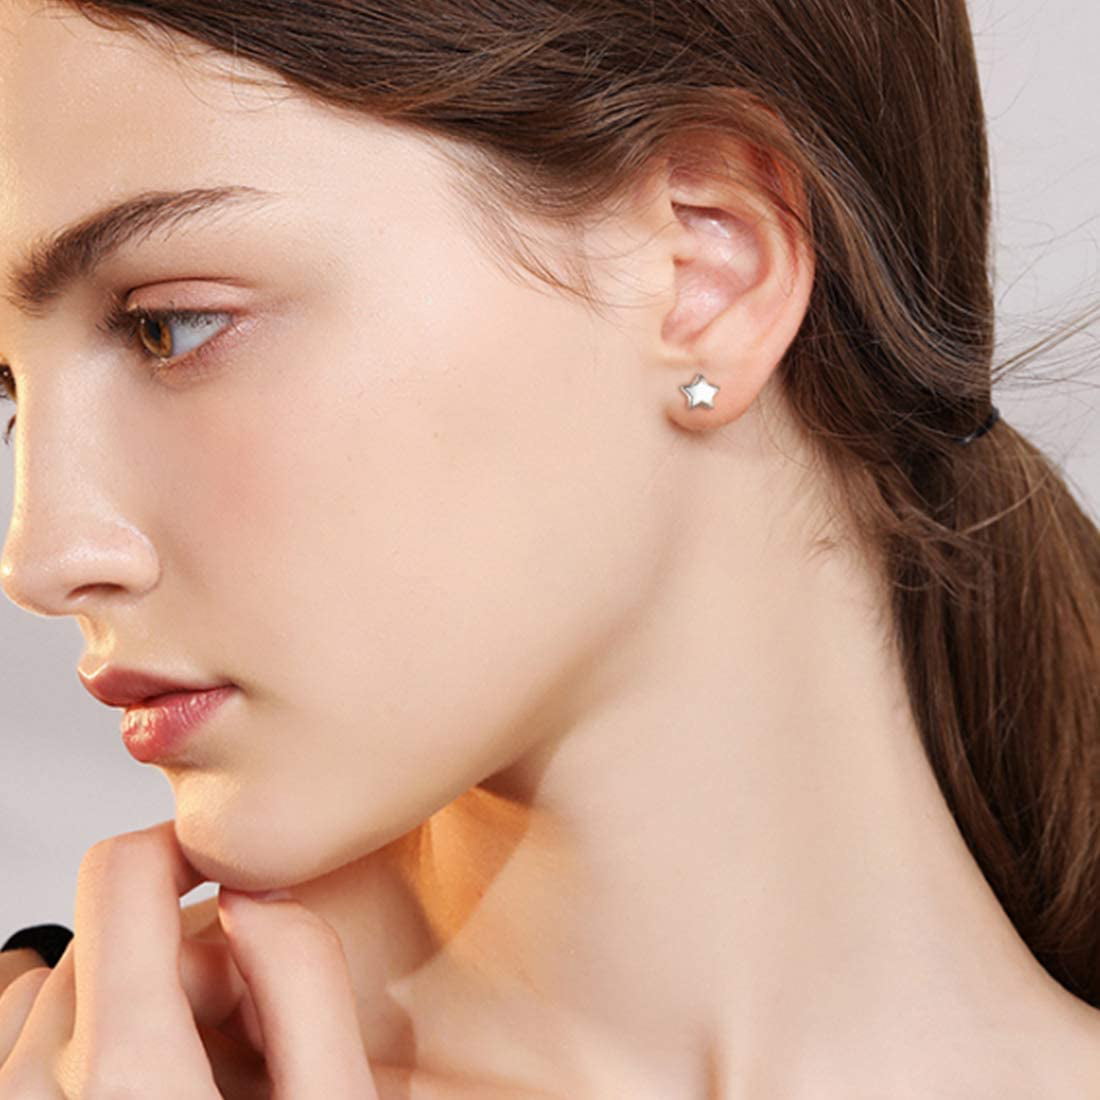 Discover more than 261 small earrings for women latest